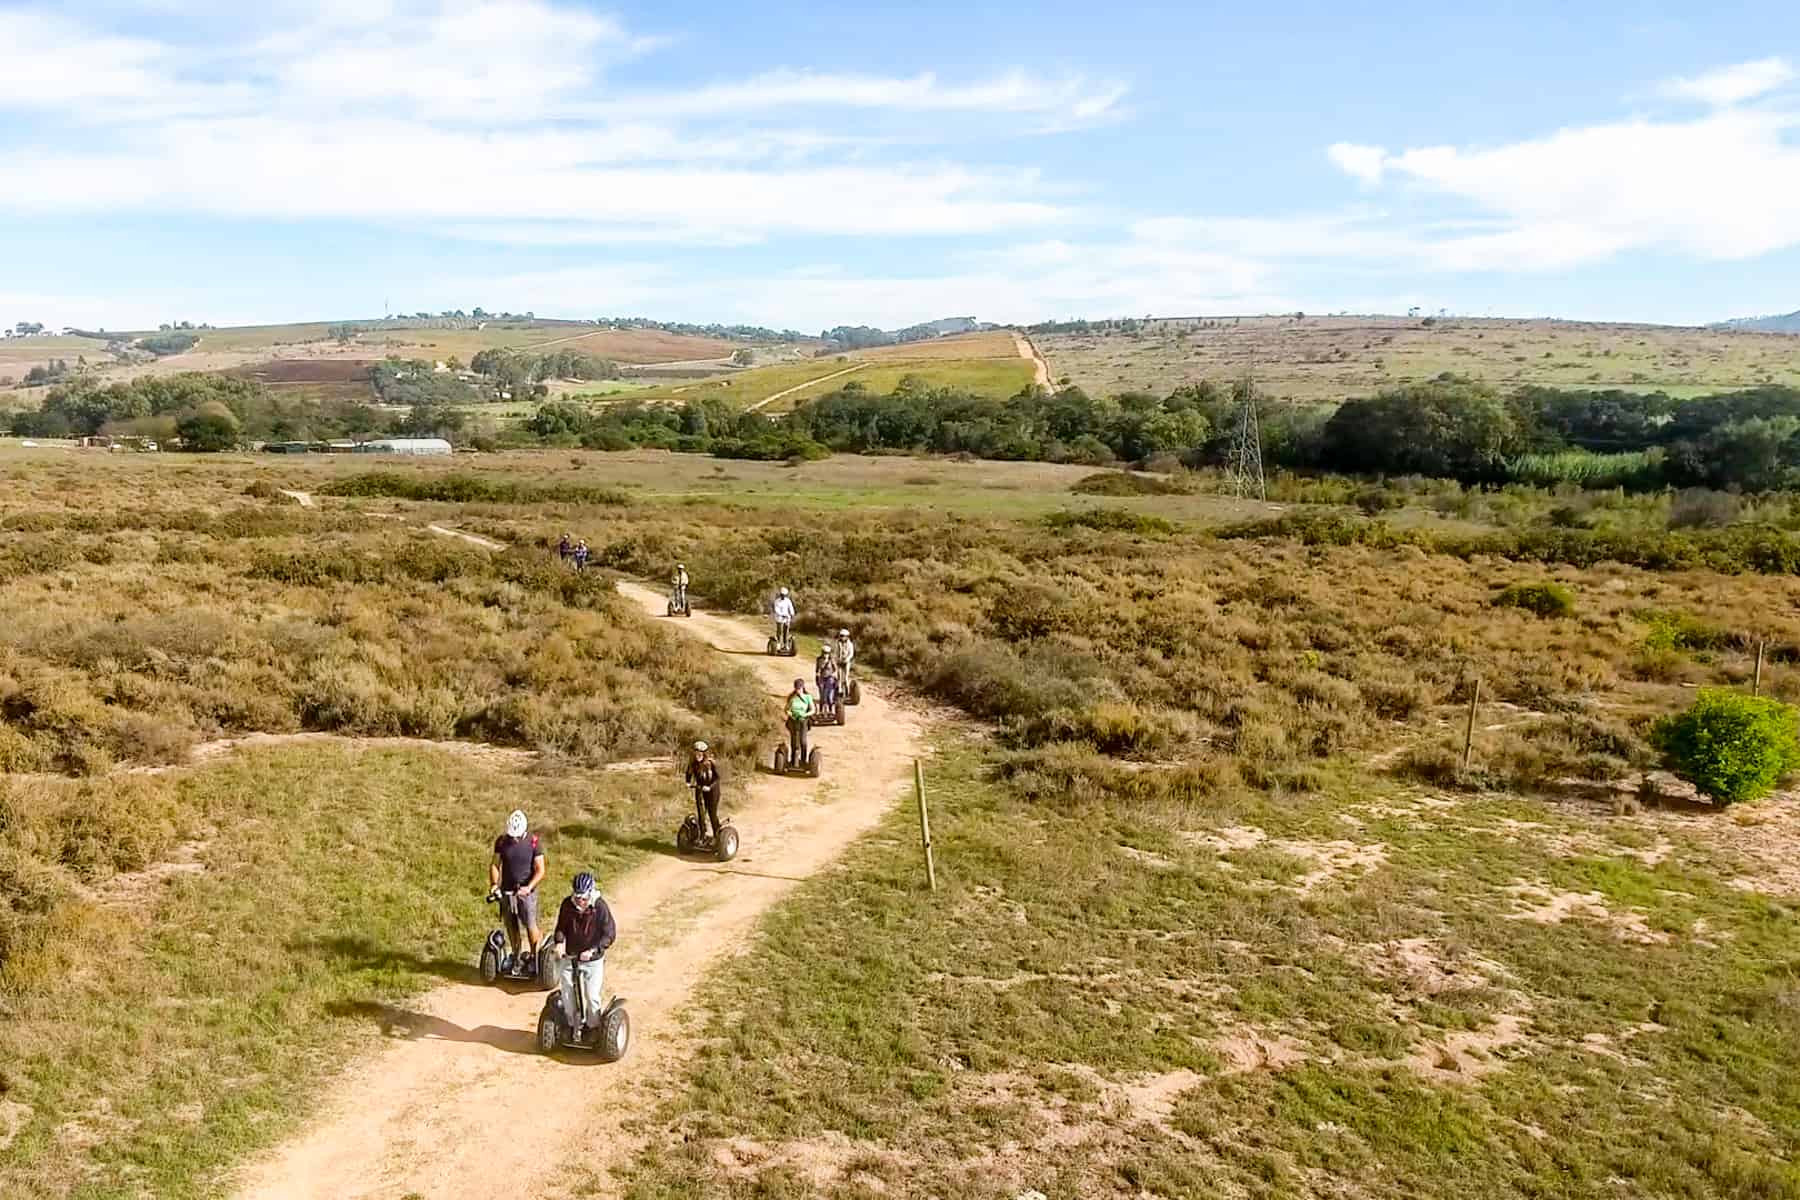 A group of people segway on a yellow path through a dusty green vineyard in Stellenbosch, South Africa